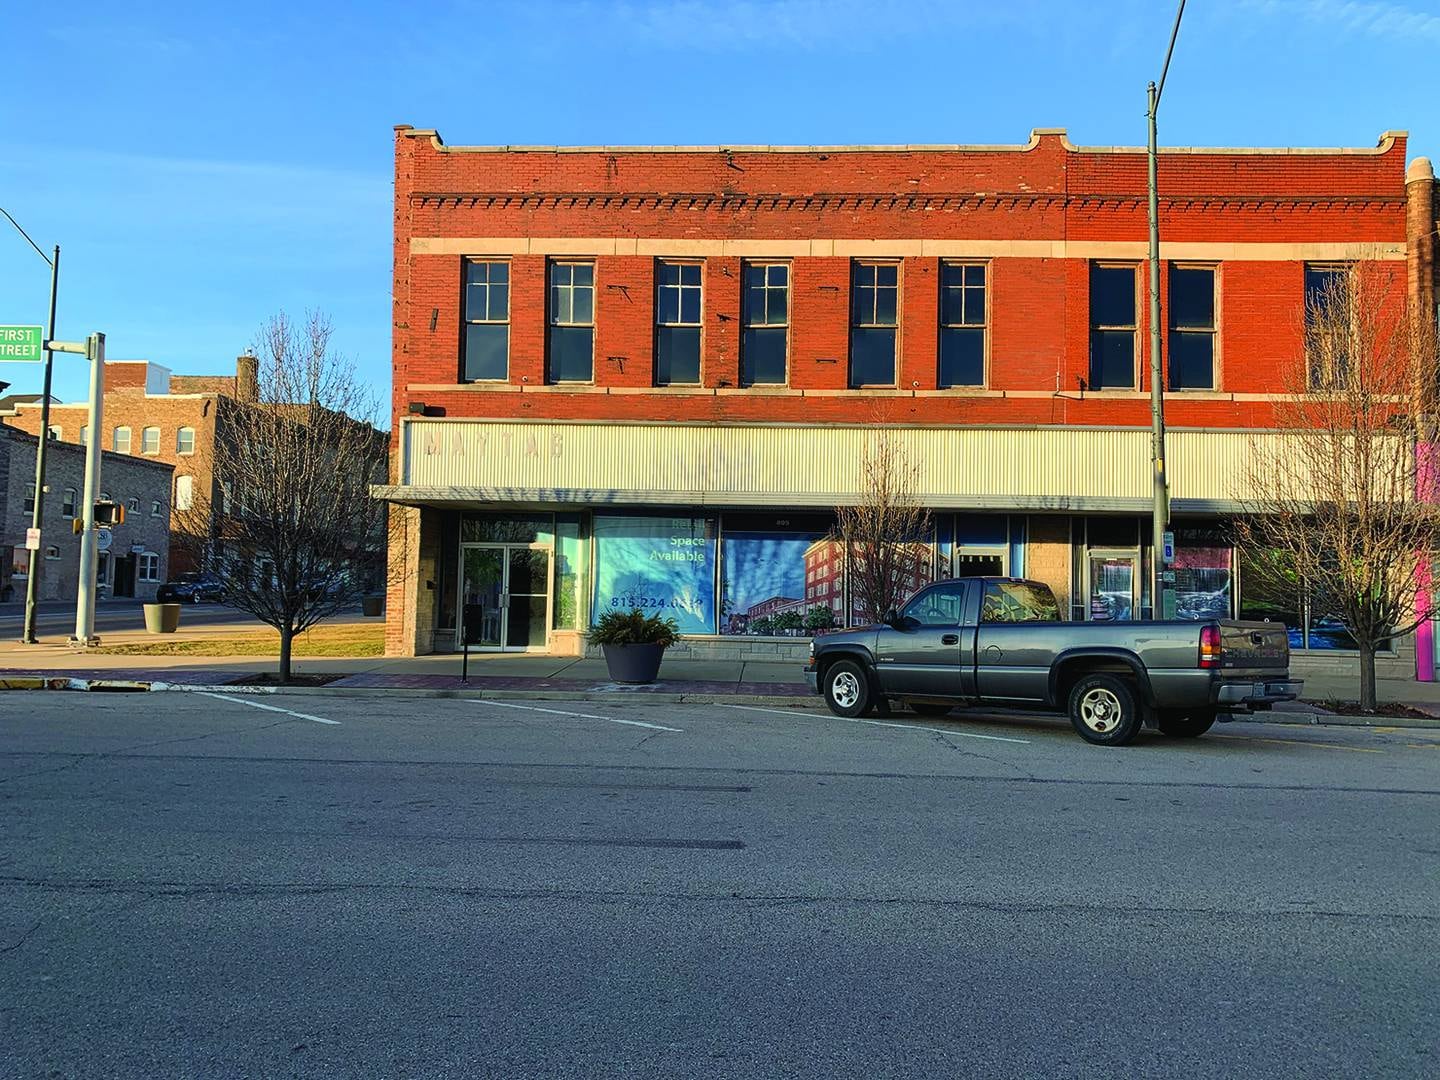 The former Maytag building in January 2020 prior to a groundbreaking hosted by CL Enterprise to turn the space into a brewpub, coffeehouse and loft apartments.